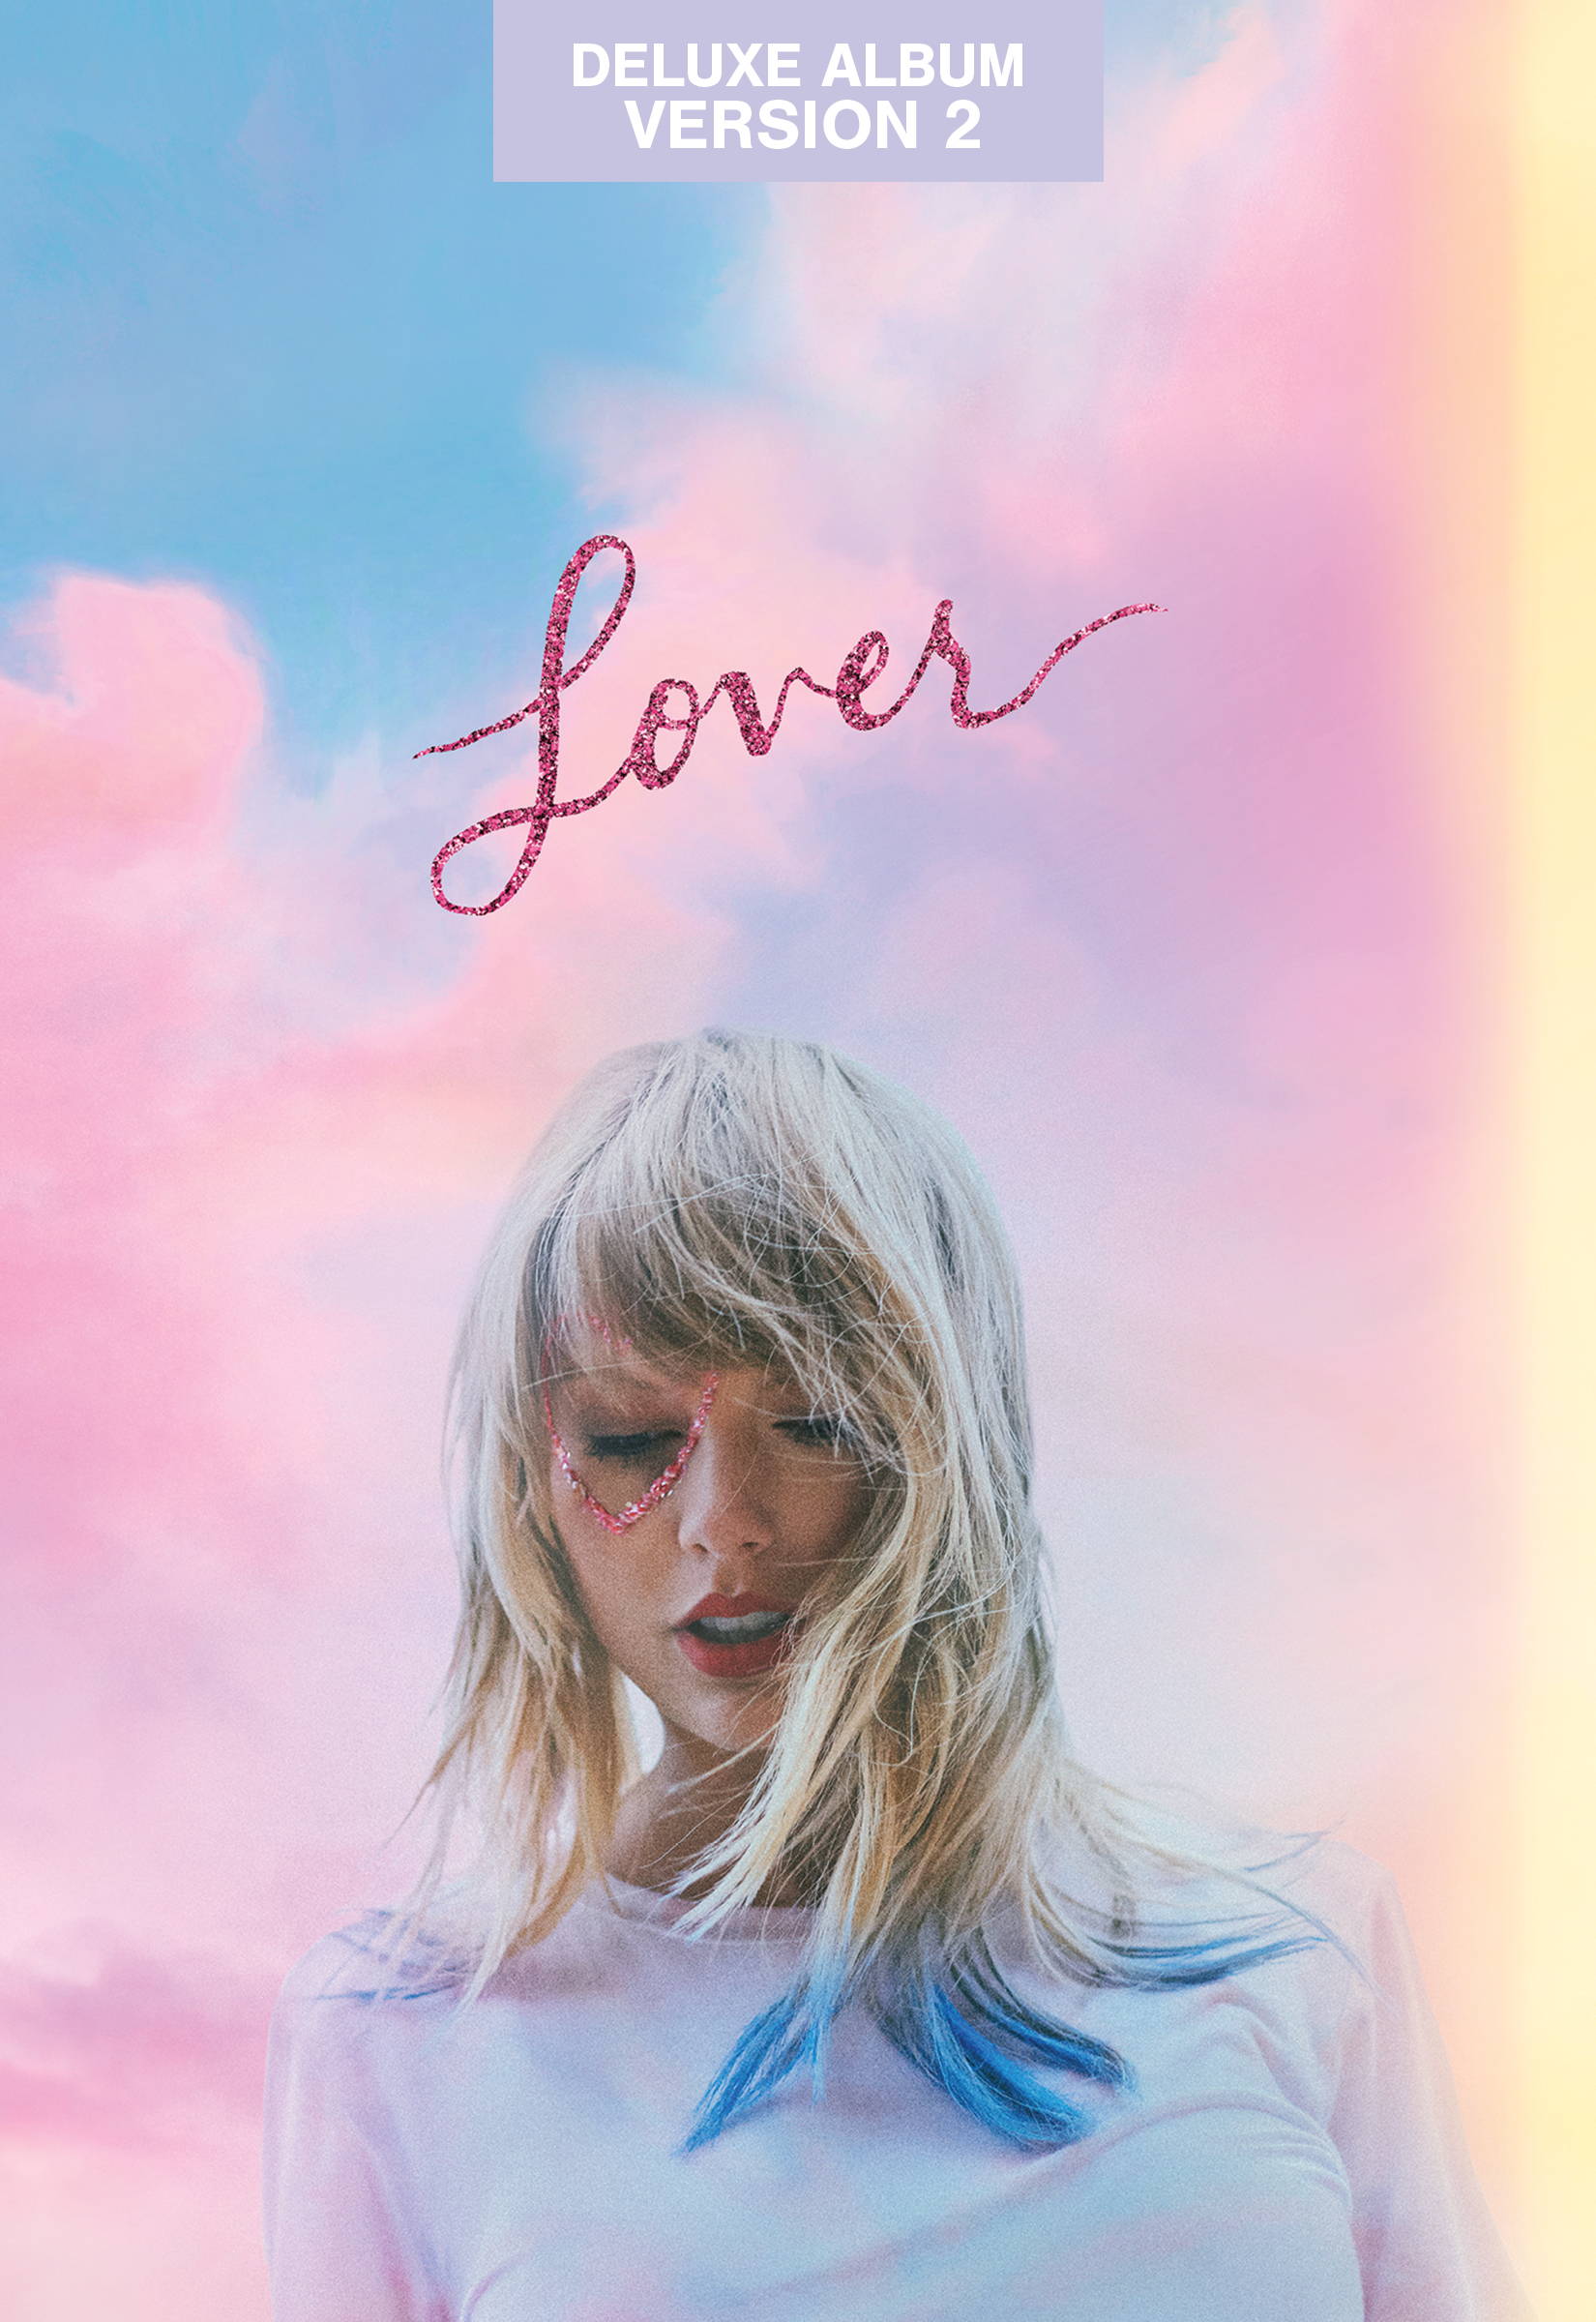 Deluxe Version 2 of Taylor Swift's new album Lover